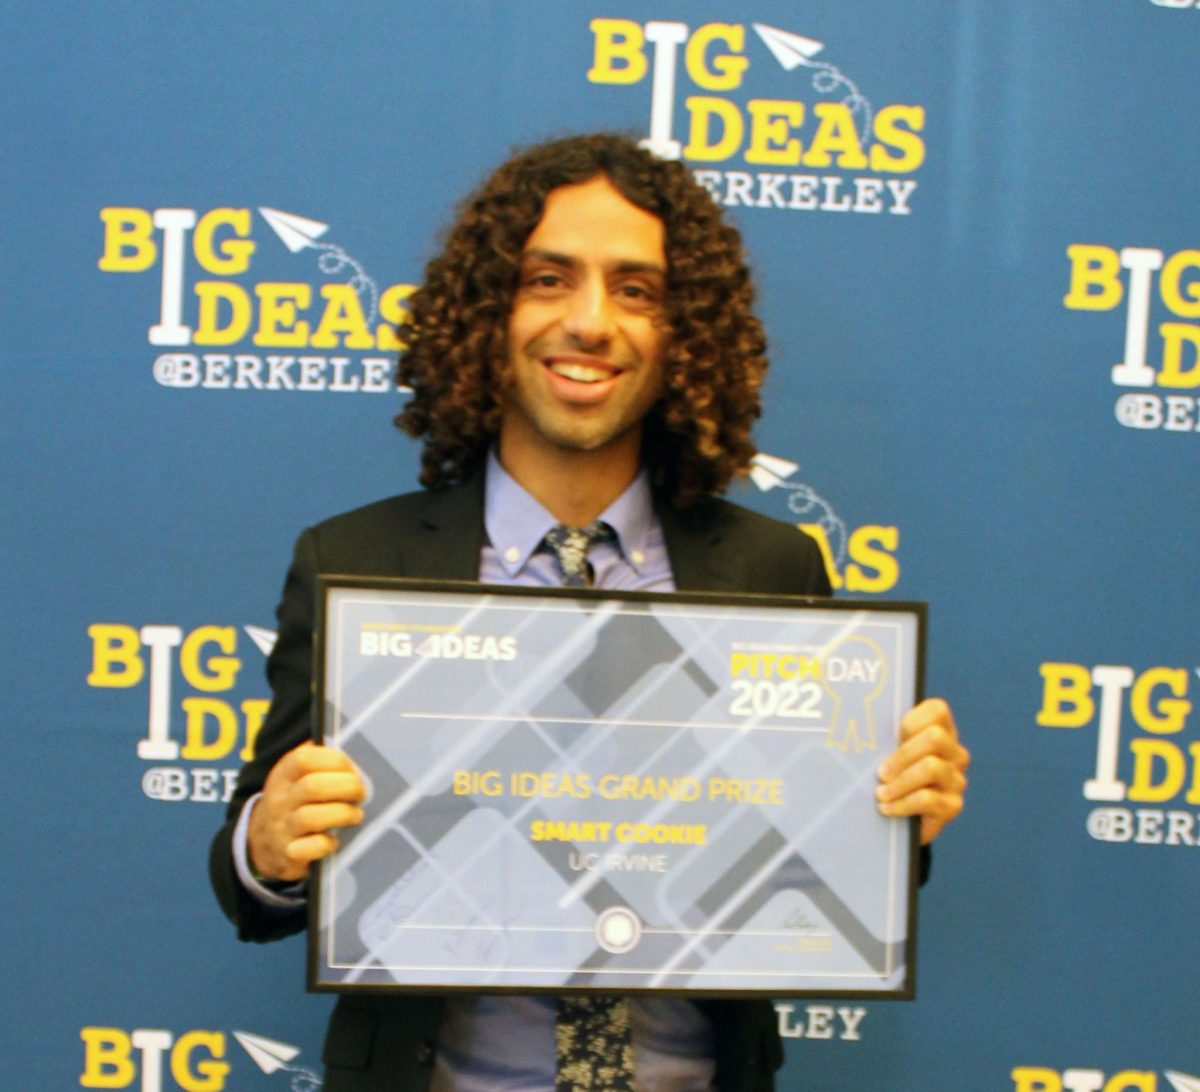 And this years’ Big Ideas Grand Prize Award Goes To…